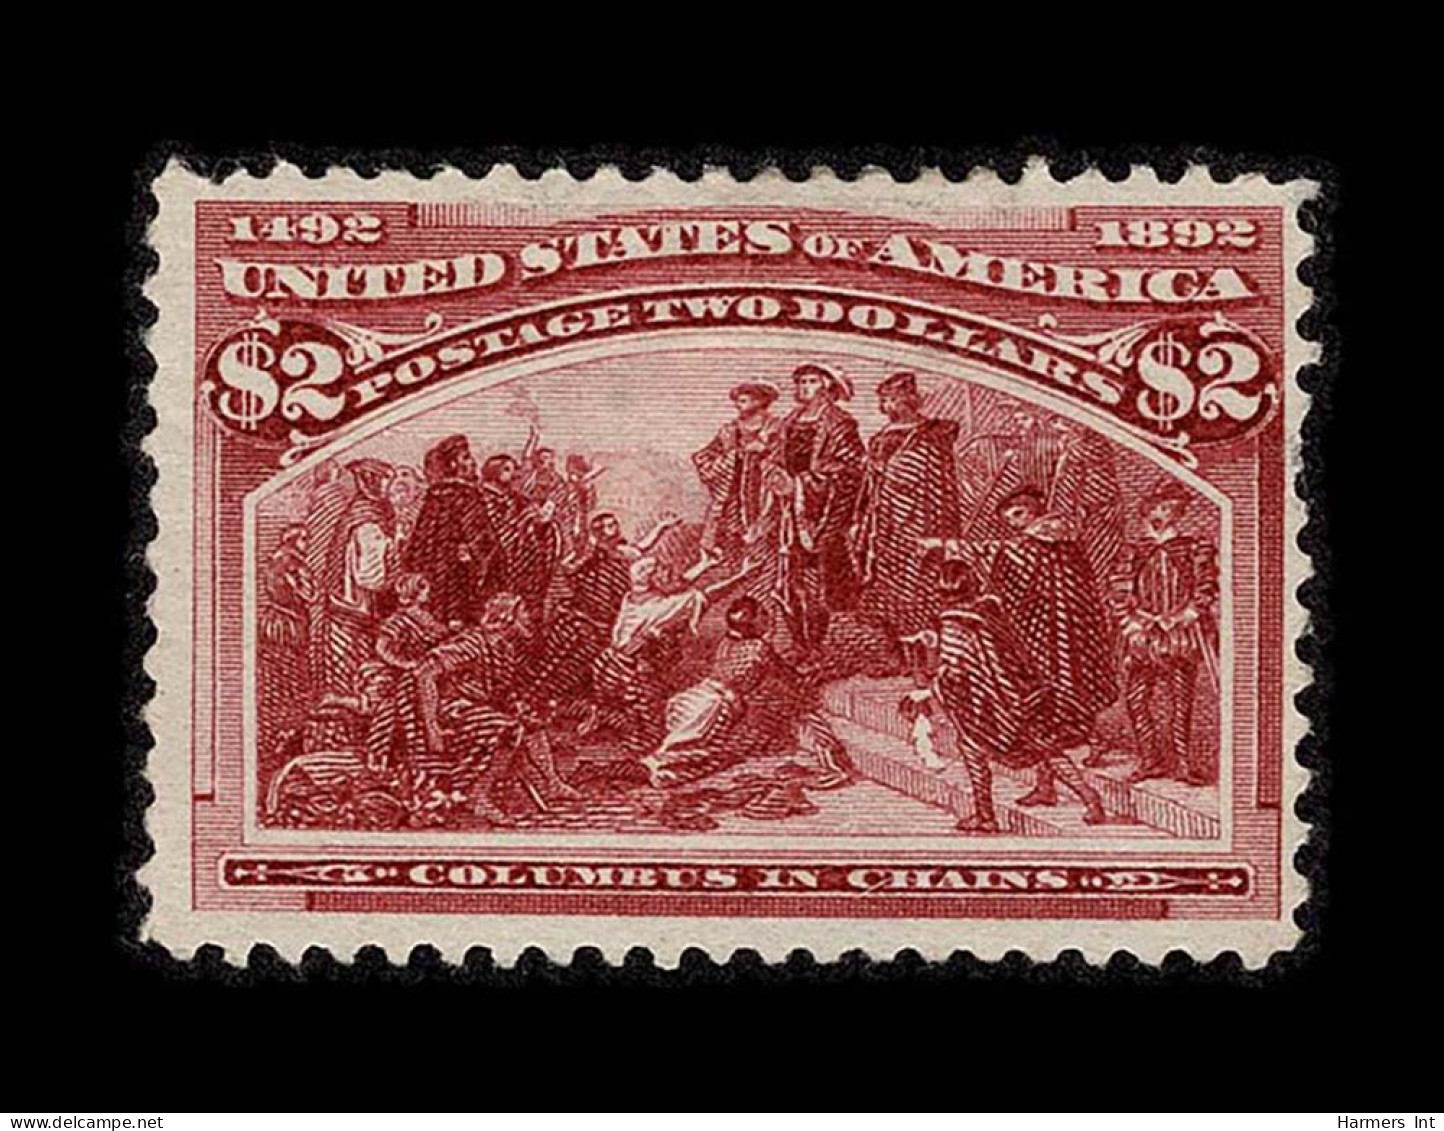 Lot # 049 1893 Columbian Issue, $2 Brown Red - Neufs